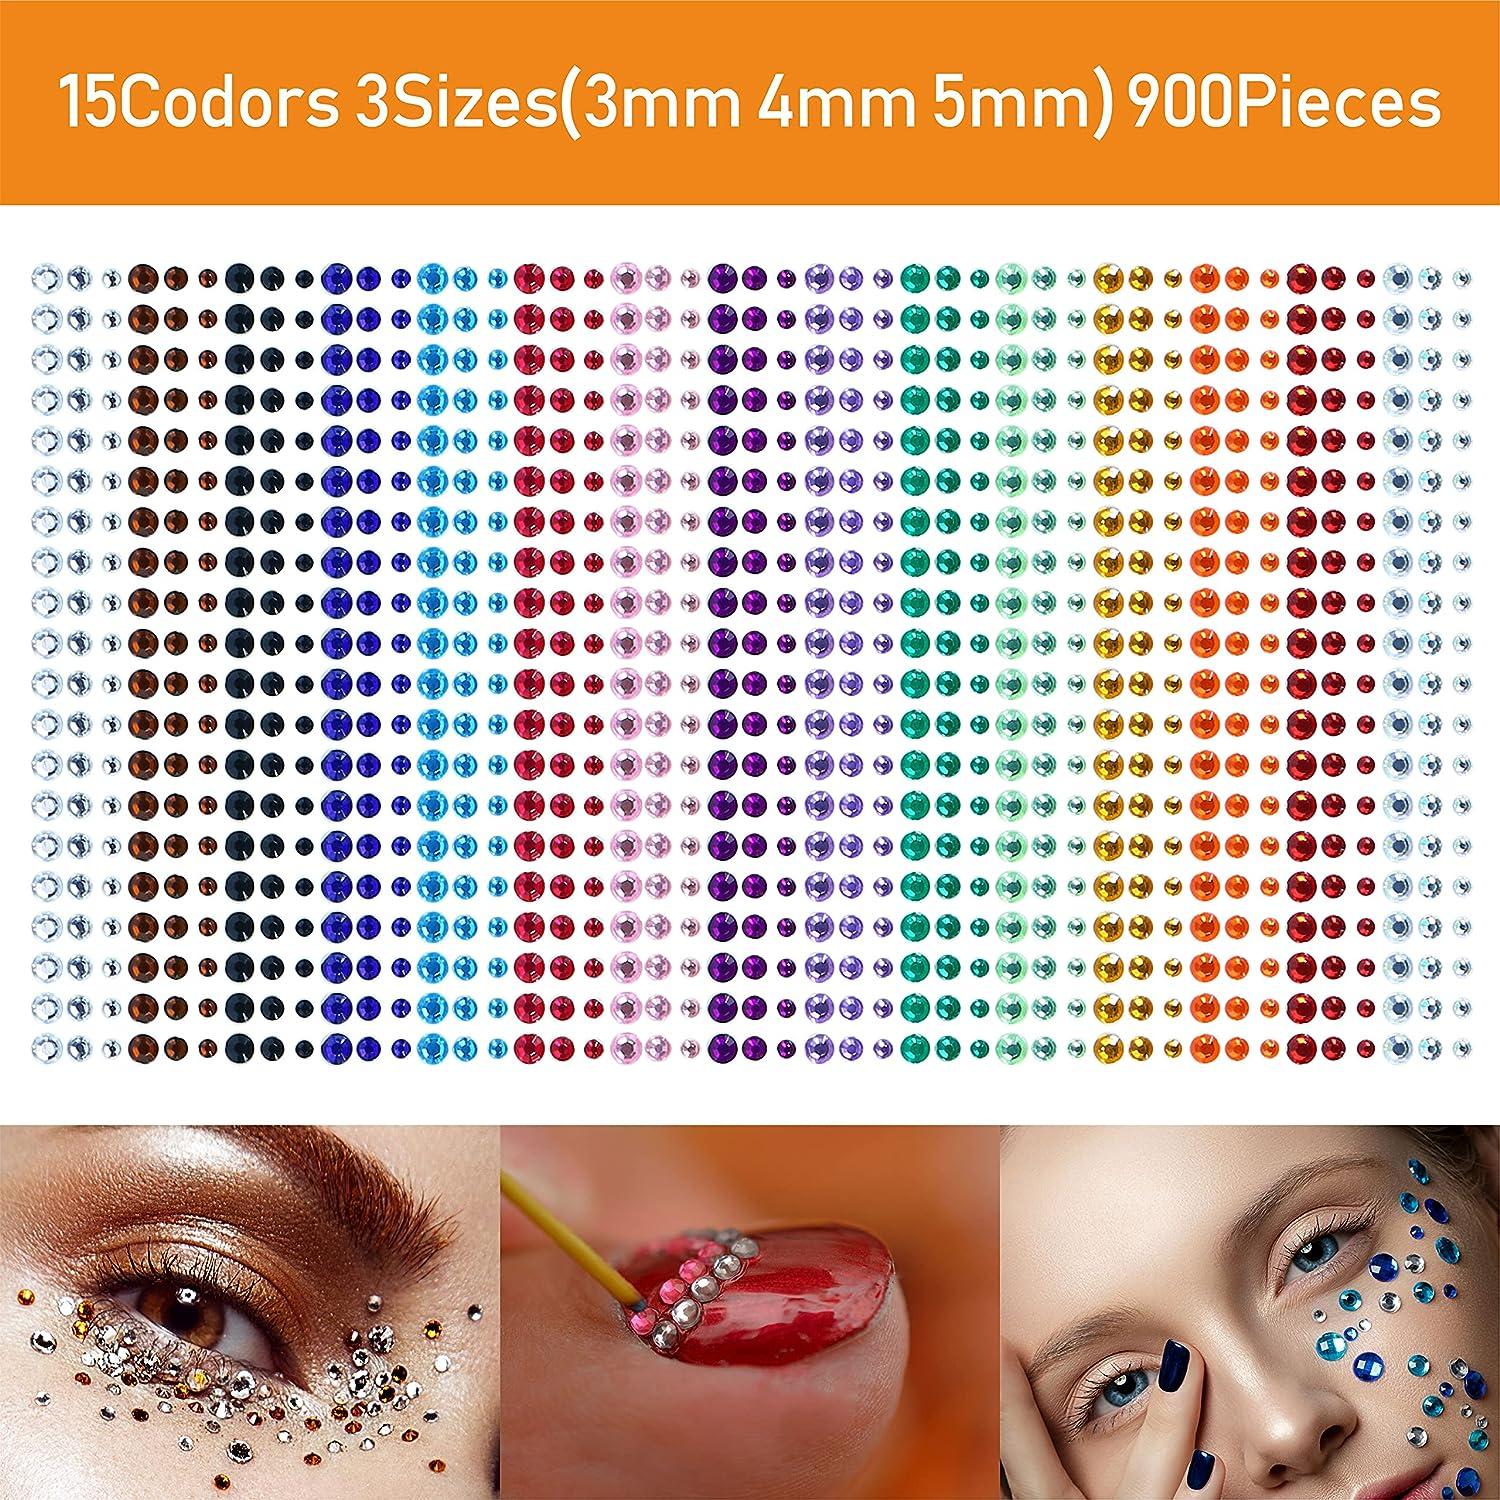 Face Gems 6 Sets Face Jewels Self-Adhesive Rhinestones Stickers